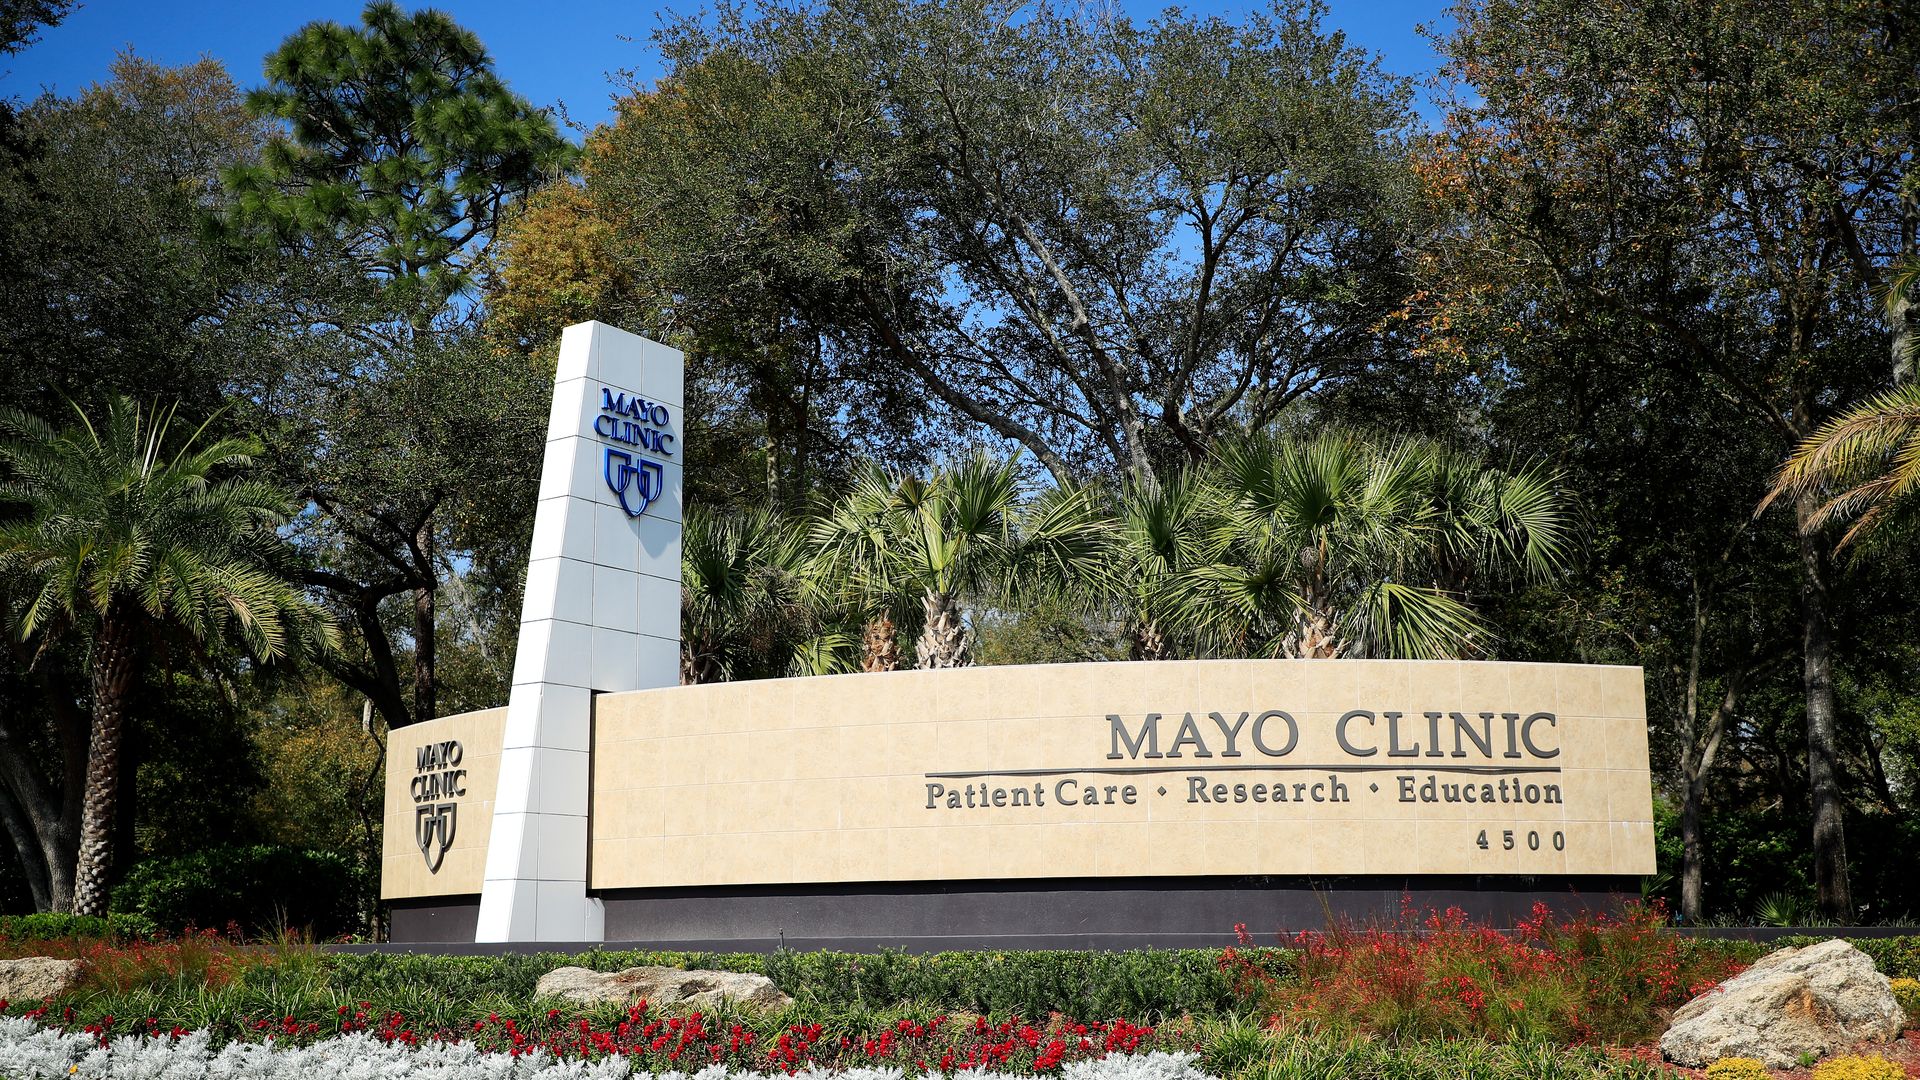 A Mayo Clinic sign surrounded by trees and flowers on the hospital campus.